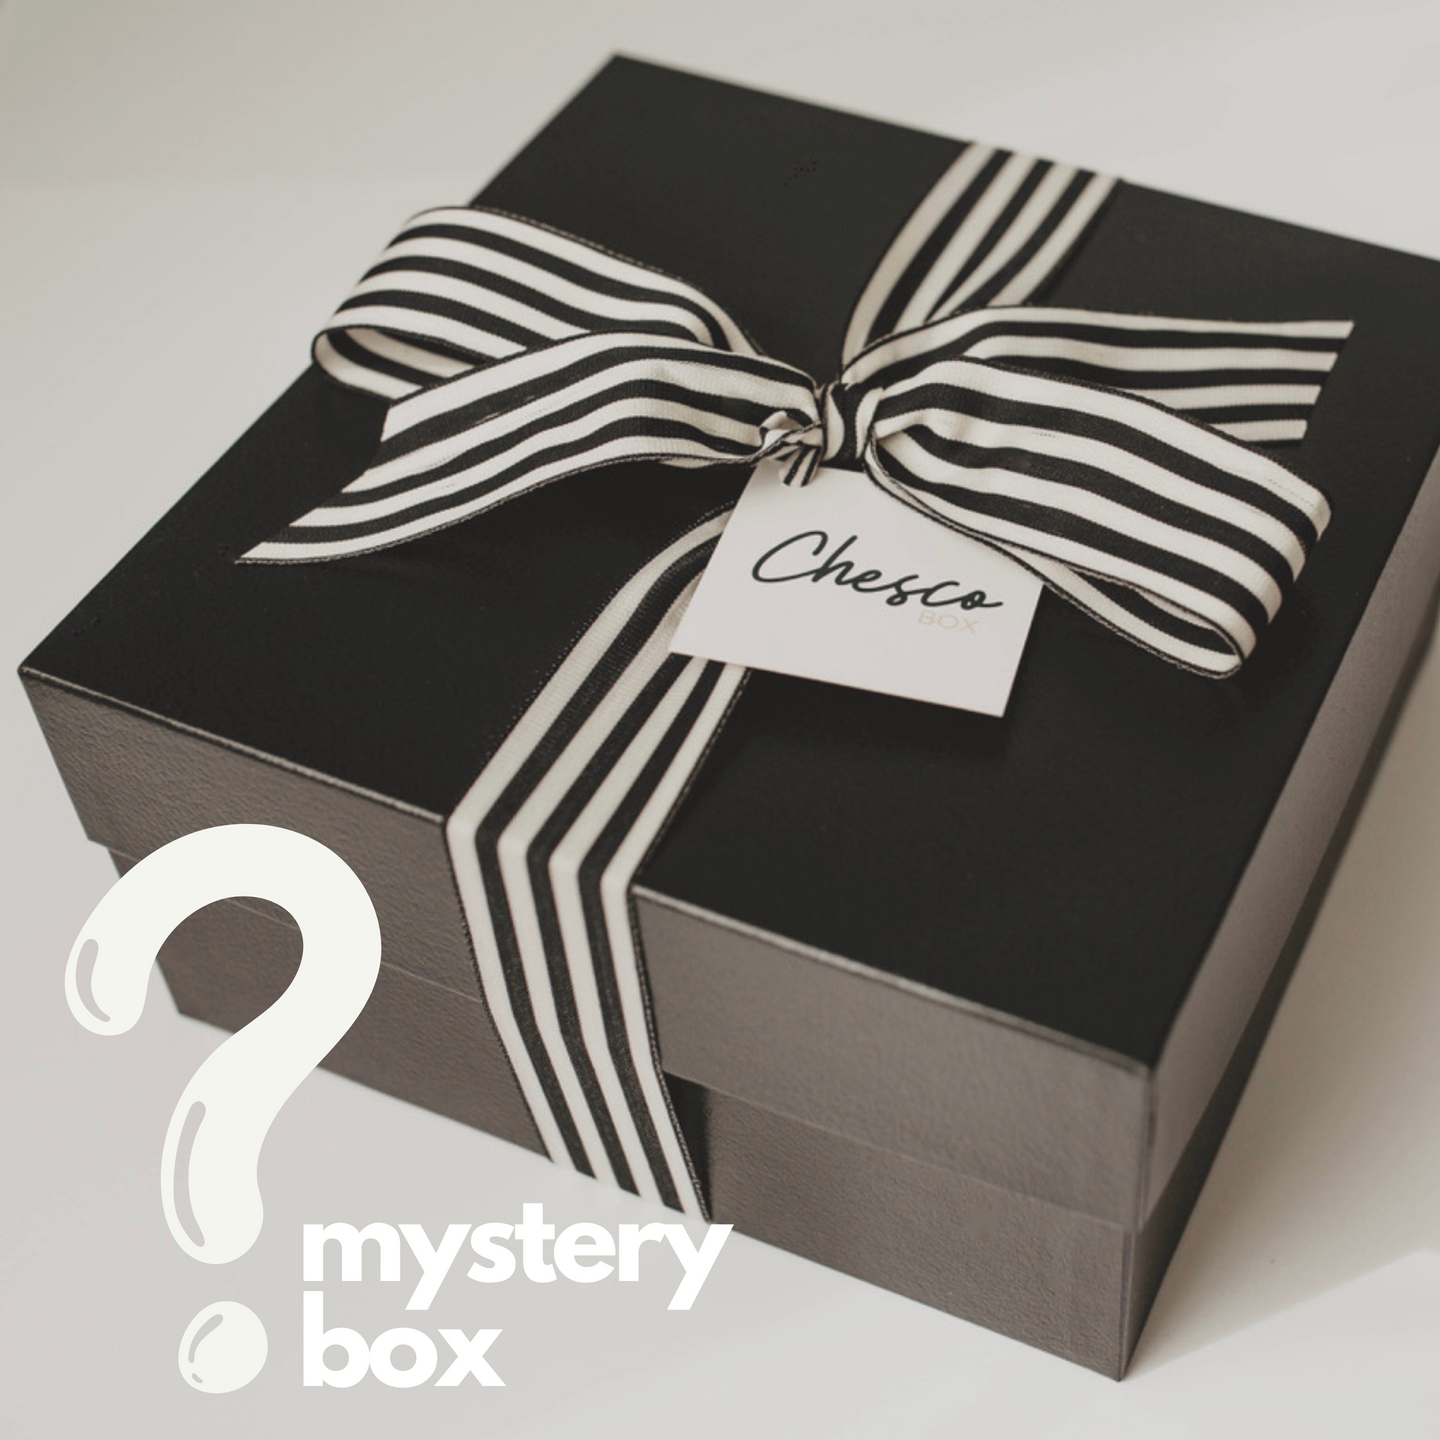 Luxury Mystery Box | Shop Luxury Bedding and Bath at Luxor Linens